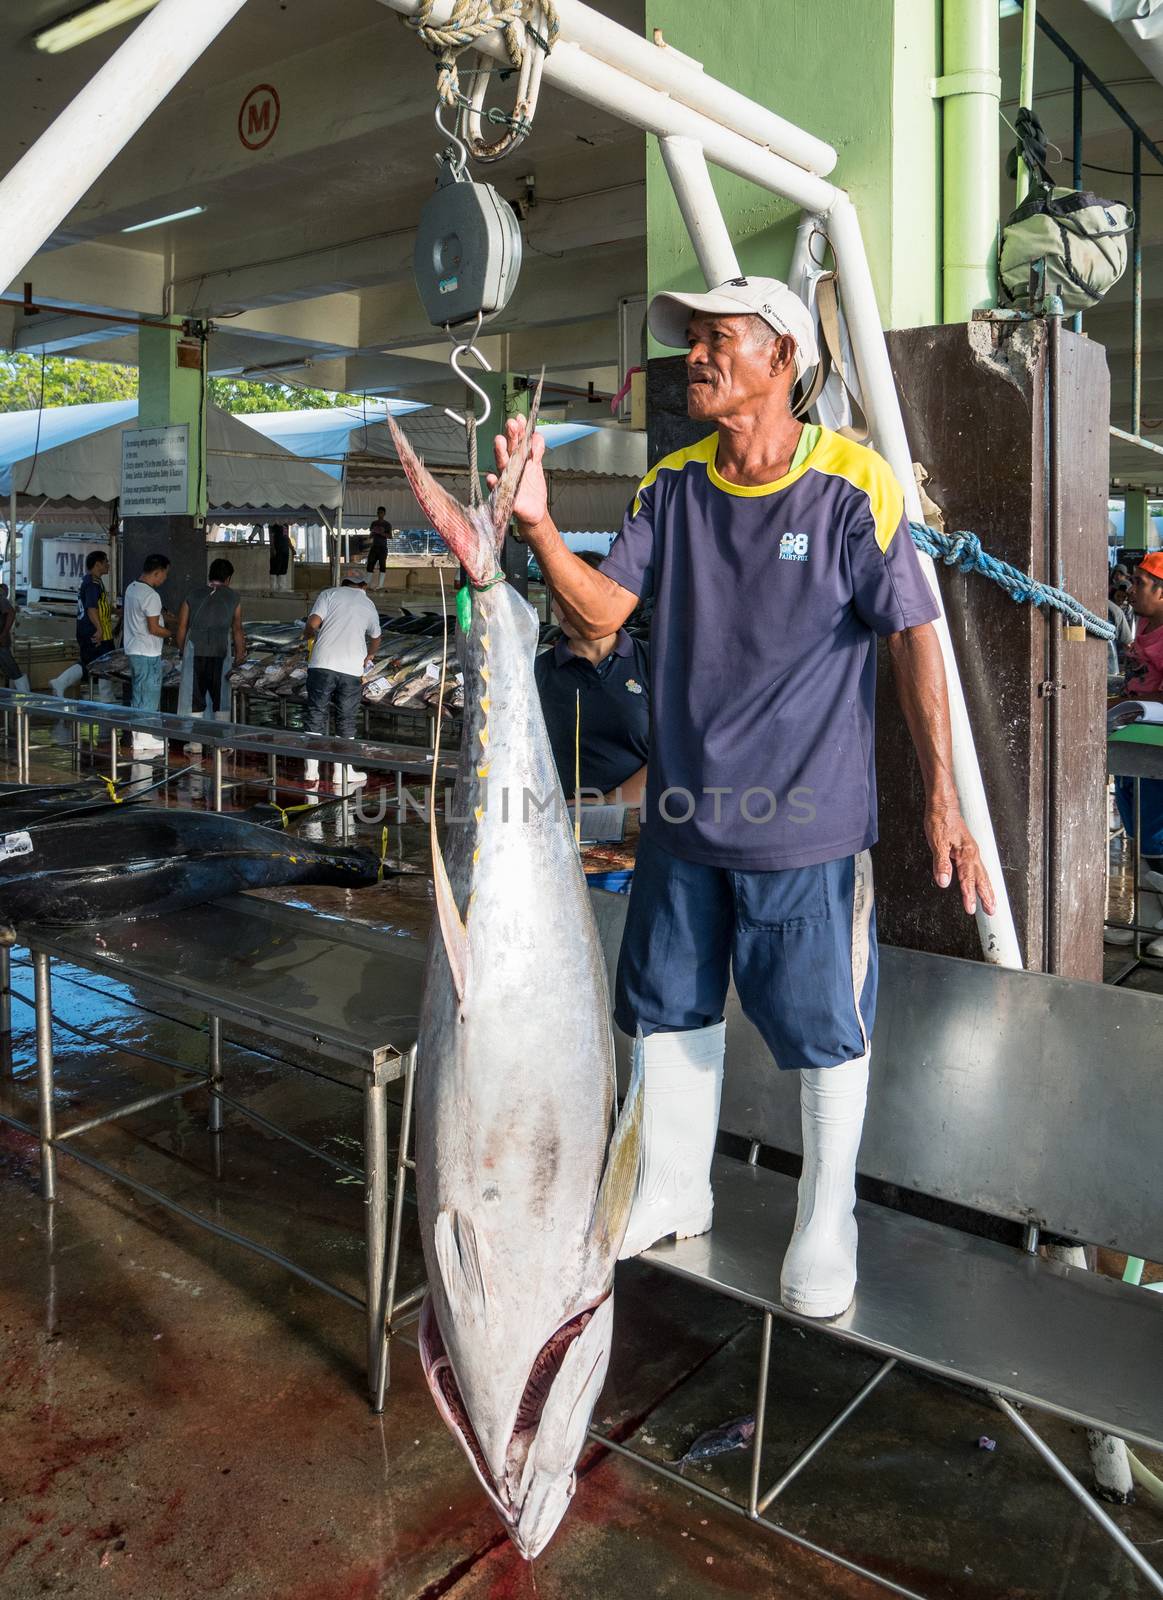 General Santos City - September 1, 2016: Yellowfin tuna being weighed at the Tuna Harbor in General Santos City, South Cotabato, The Philippines. General Santos is the Tuna Capital of The Philippines, and the tuna industry is an important contributor the the city’s economy with export worldwide.